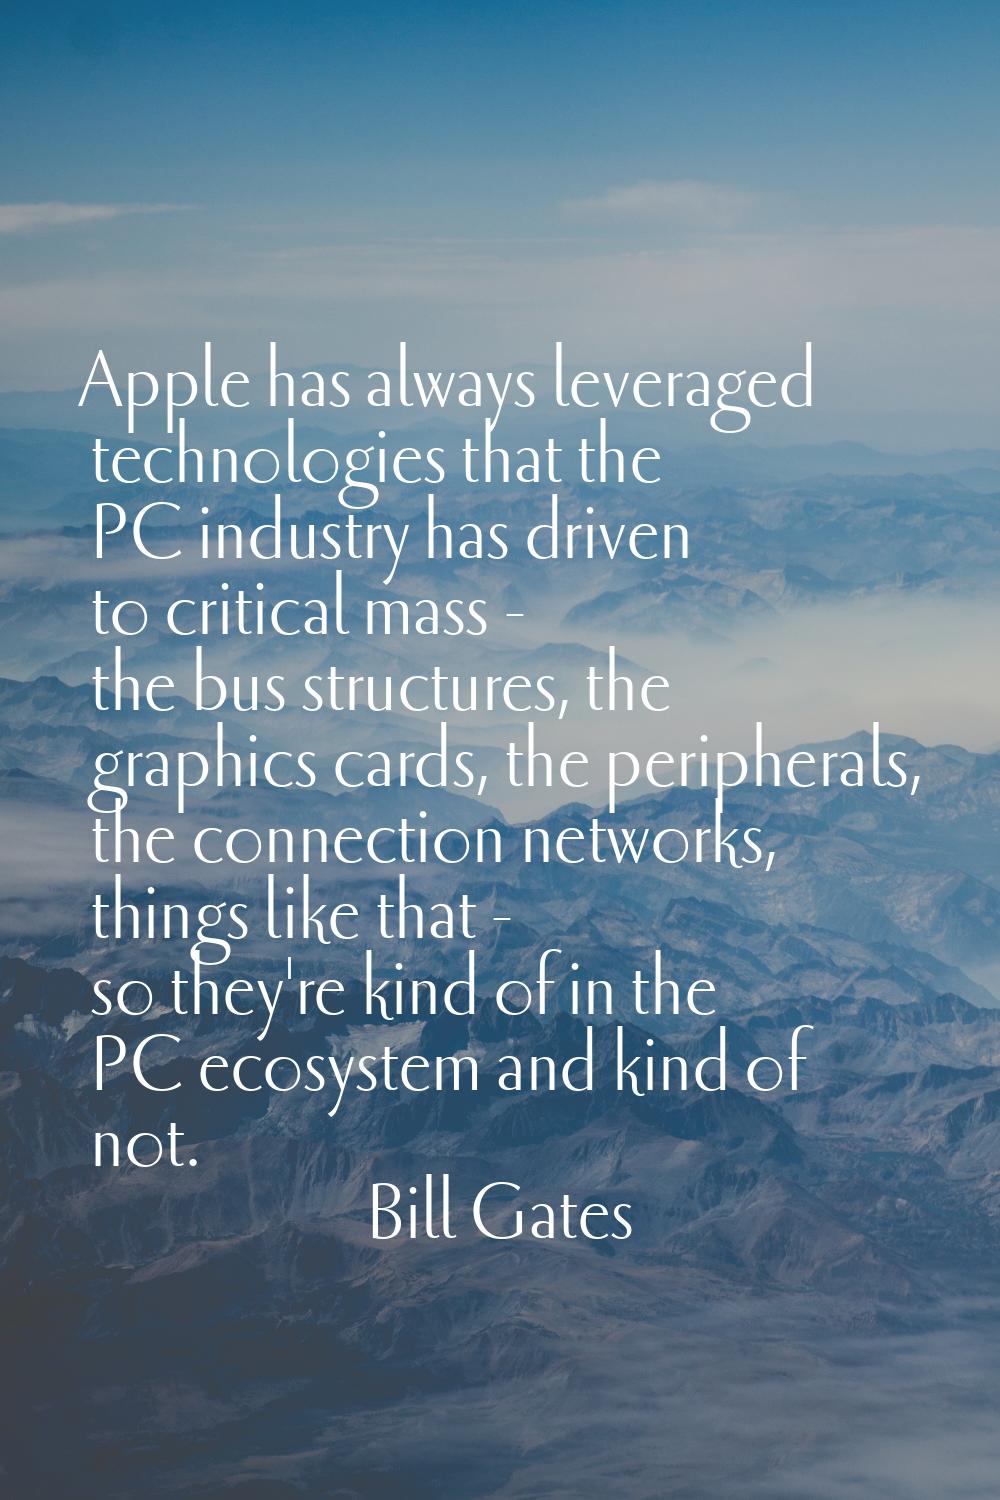 Apple has always leveraged technologies that the PC industry has driven to critical mass - the bus 